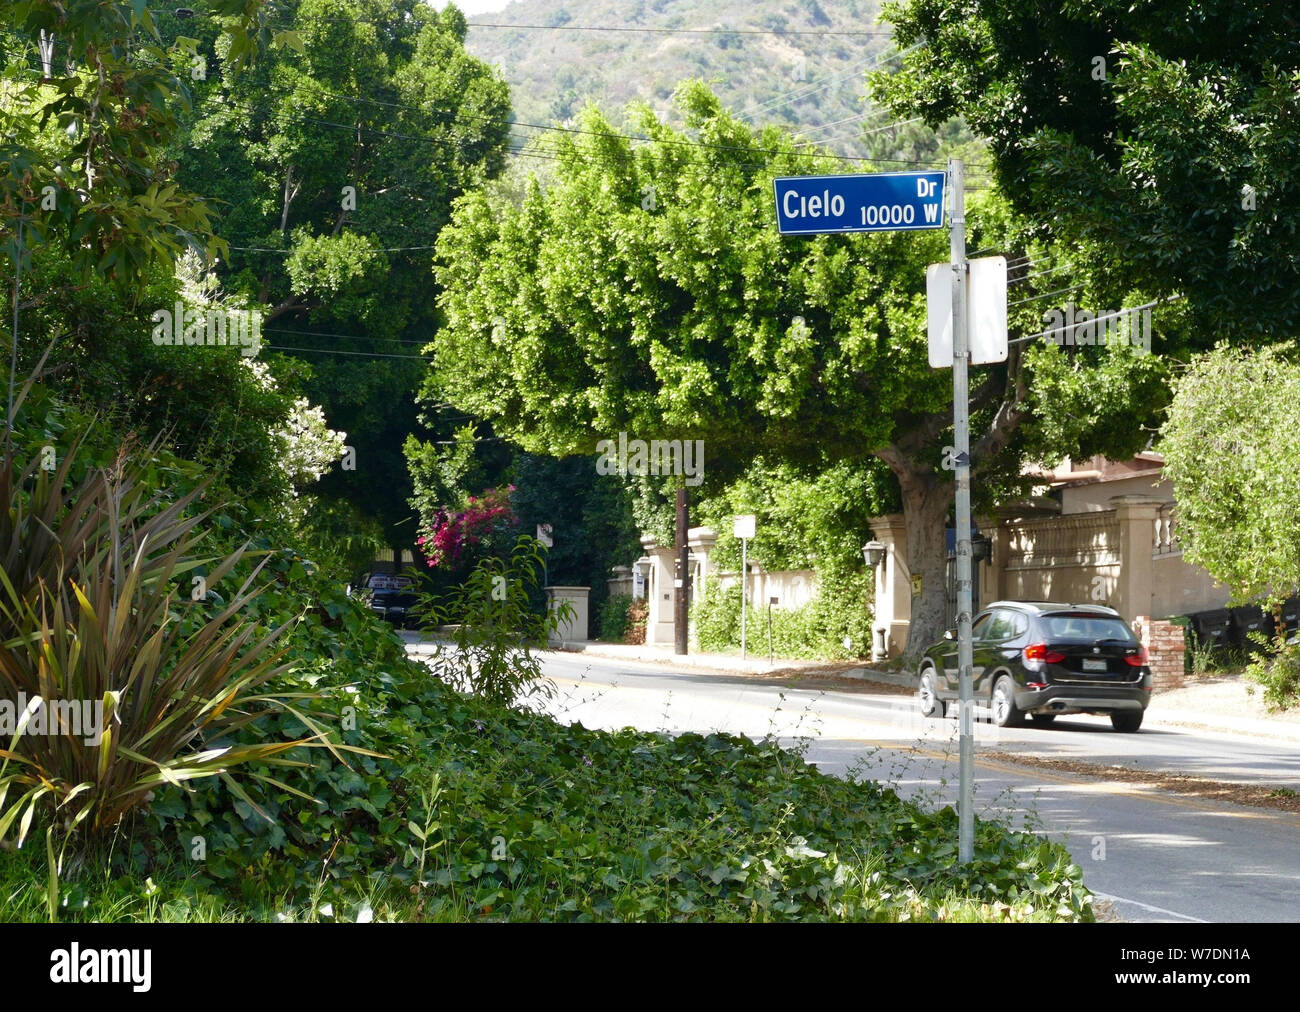 Los Angeles, USA. 03rd Aug, 2019. Road sign of Cielo Drive. In Cielo Drive is the former property of the house where the actress Sharon Tate was murdered. A barbaric series of murders scared the world 50 years ago. Sect leader Charles Manson incited his followers to blood orgies. In 1969 also the highly pregnant actress Sharon Tate was killed. (to dpa '50 Years after the Manson Bloodbath: On the Trails of Sharon Tate') Credit: Barbara Munker/dpa/Alamy Live News Stock Photo